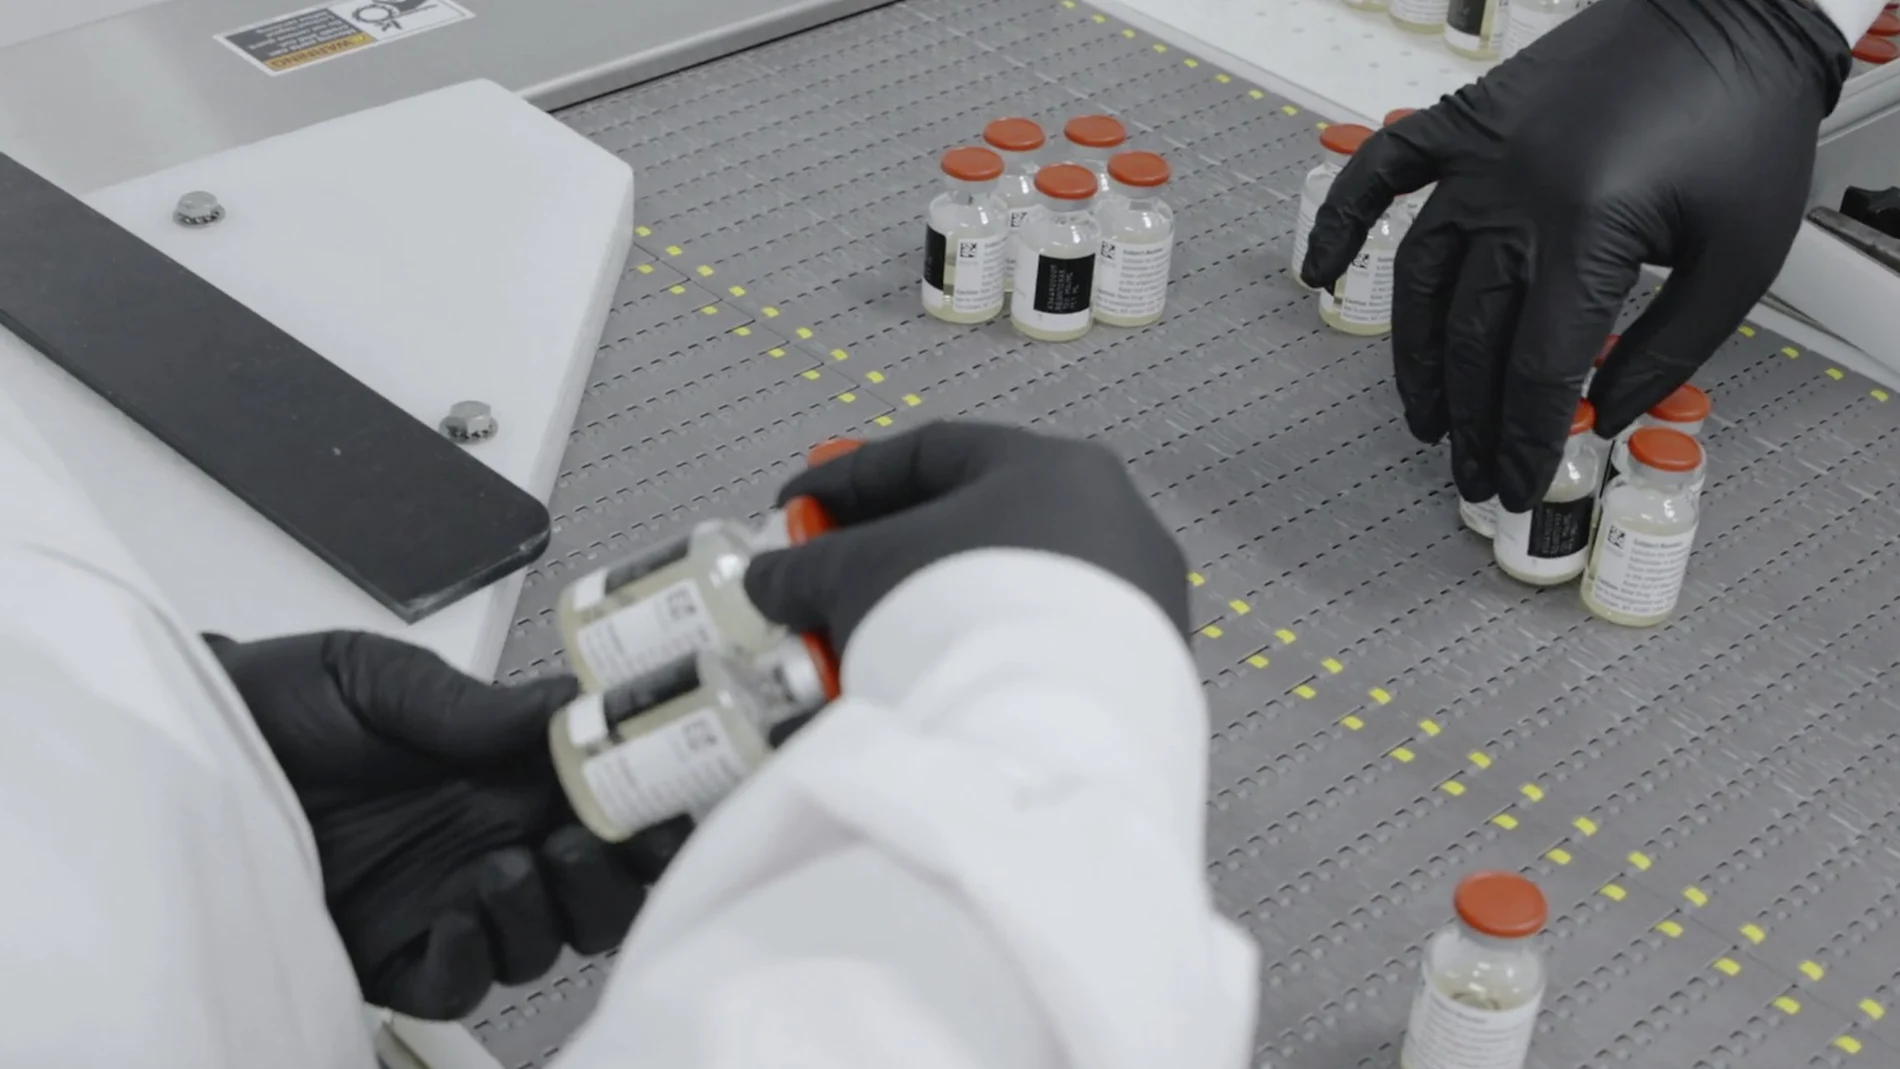 In this undated image from video provided by Regeneron Pharmaceuticals on Friday, Oct. 2, 2020, vials are inspected at the company's facilities in New York state, for efforts on an experimental coronavirus antibody drug. Antibodies are proteins the body makes when an infection occurs; they attach to a virus and help the immune system eliminate it. (Regeneron via AP)